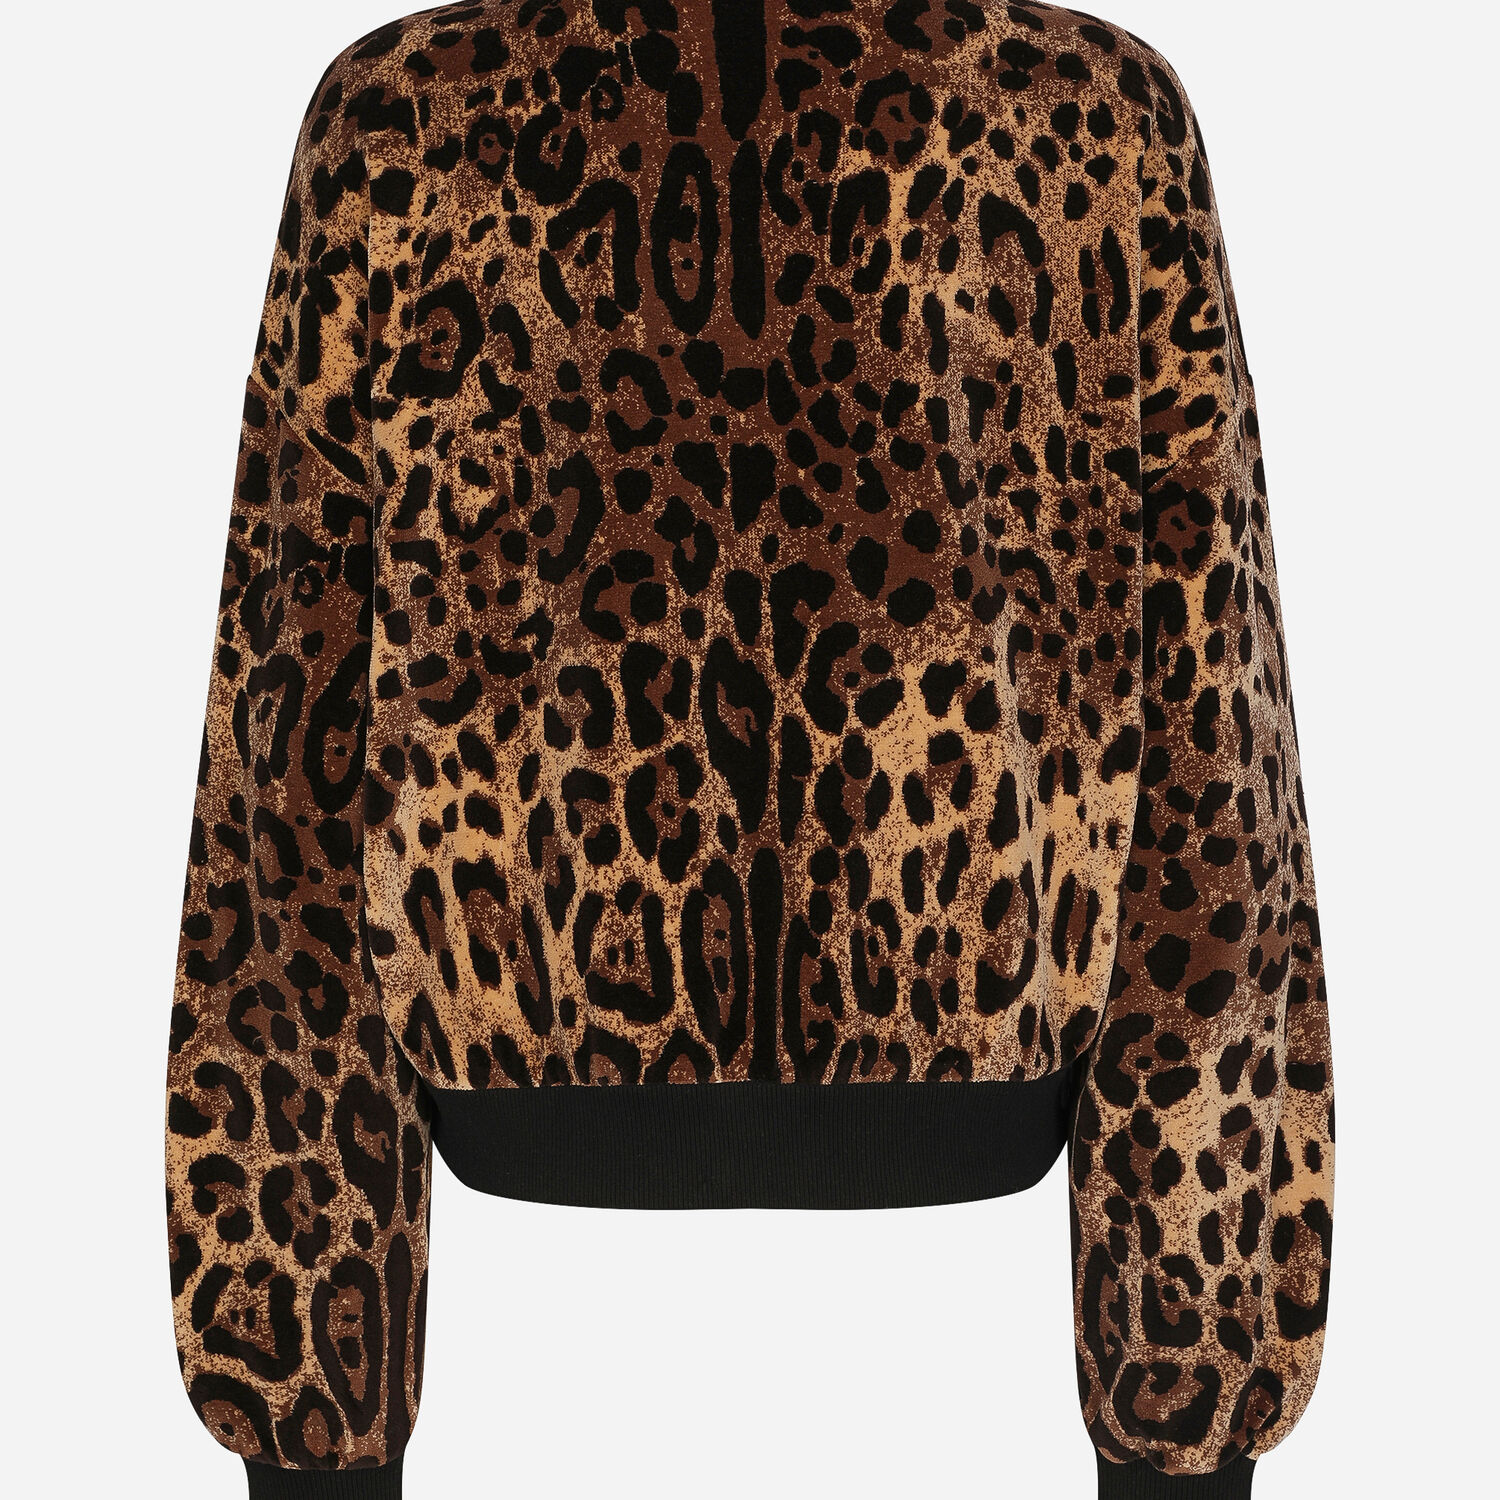 Round-neck chenille sweatshirt with jacquard leopard design in Multicolor  for | Dolce&Gabbana® US | Shortys